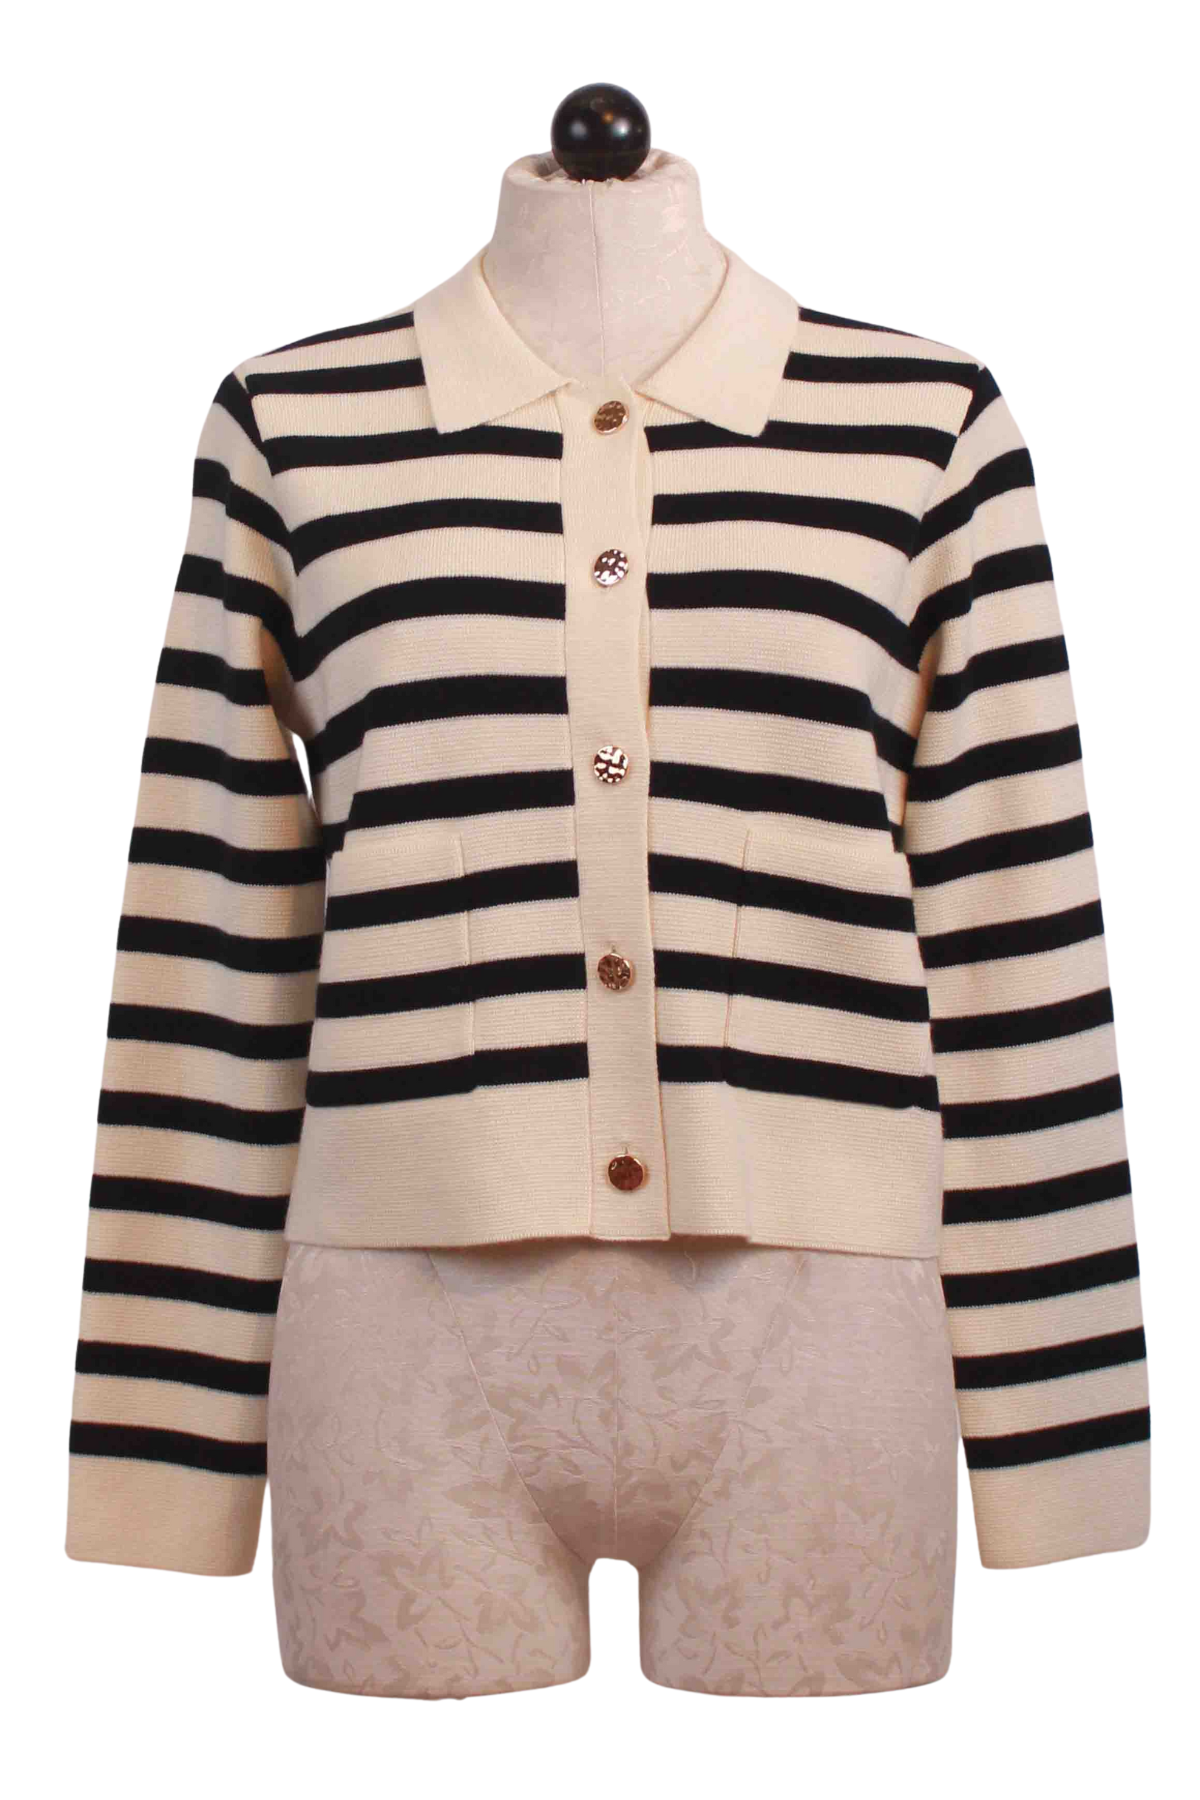 Black and Cream Stripe Maelys Sweater Jacket by Grace and Mila